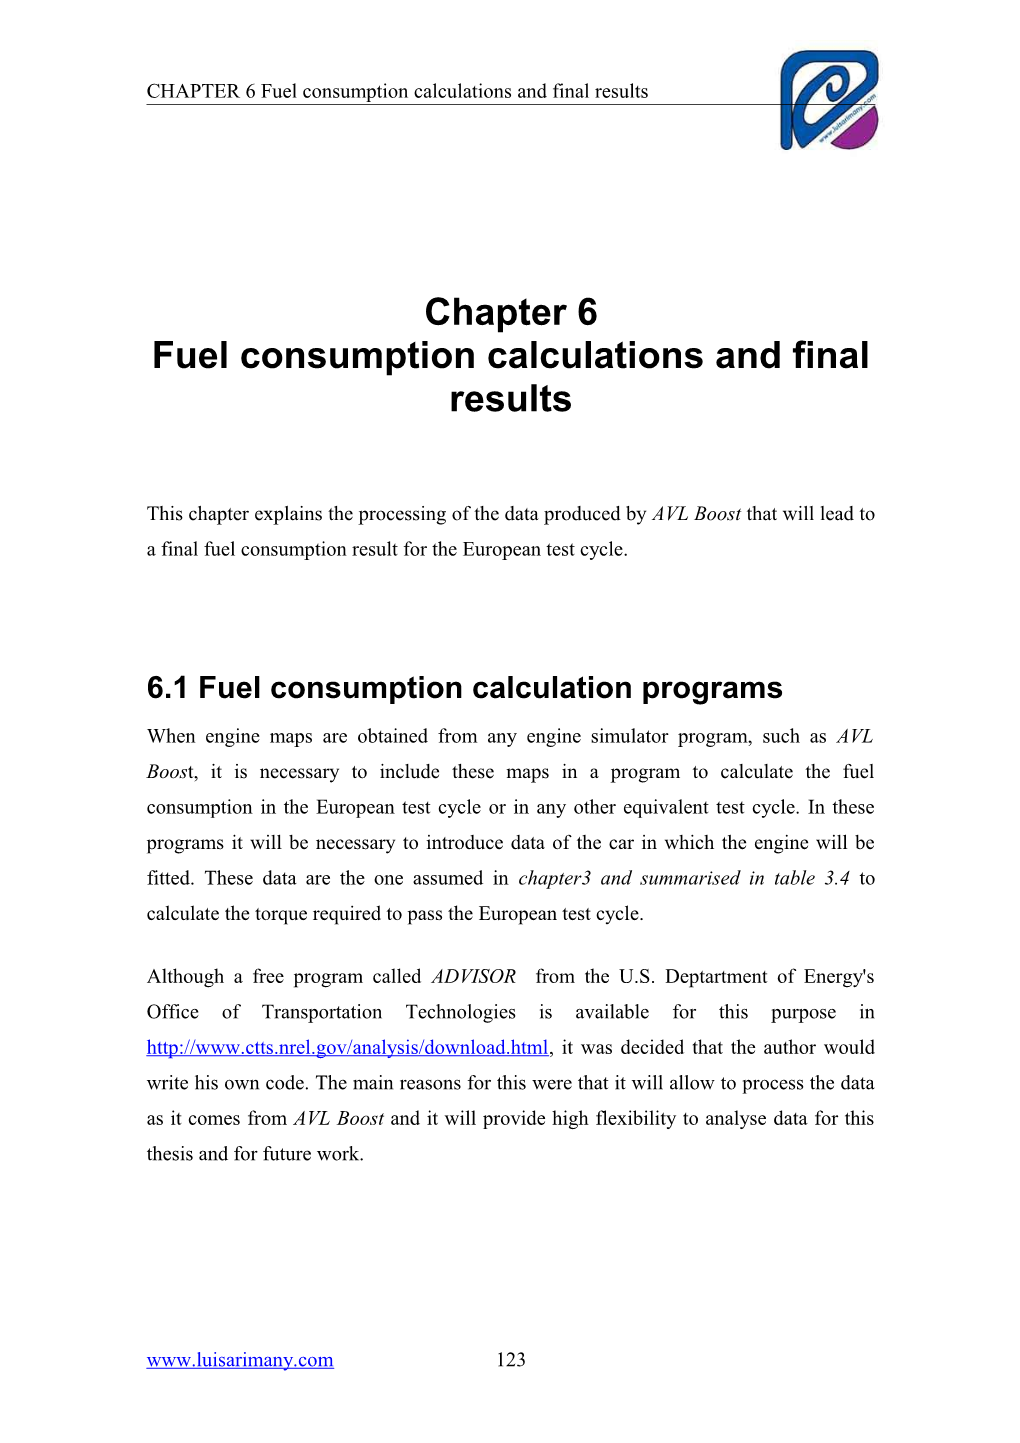 Chapter 6 Fuel Consumption Calculations and Final Results